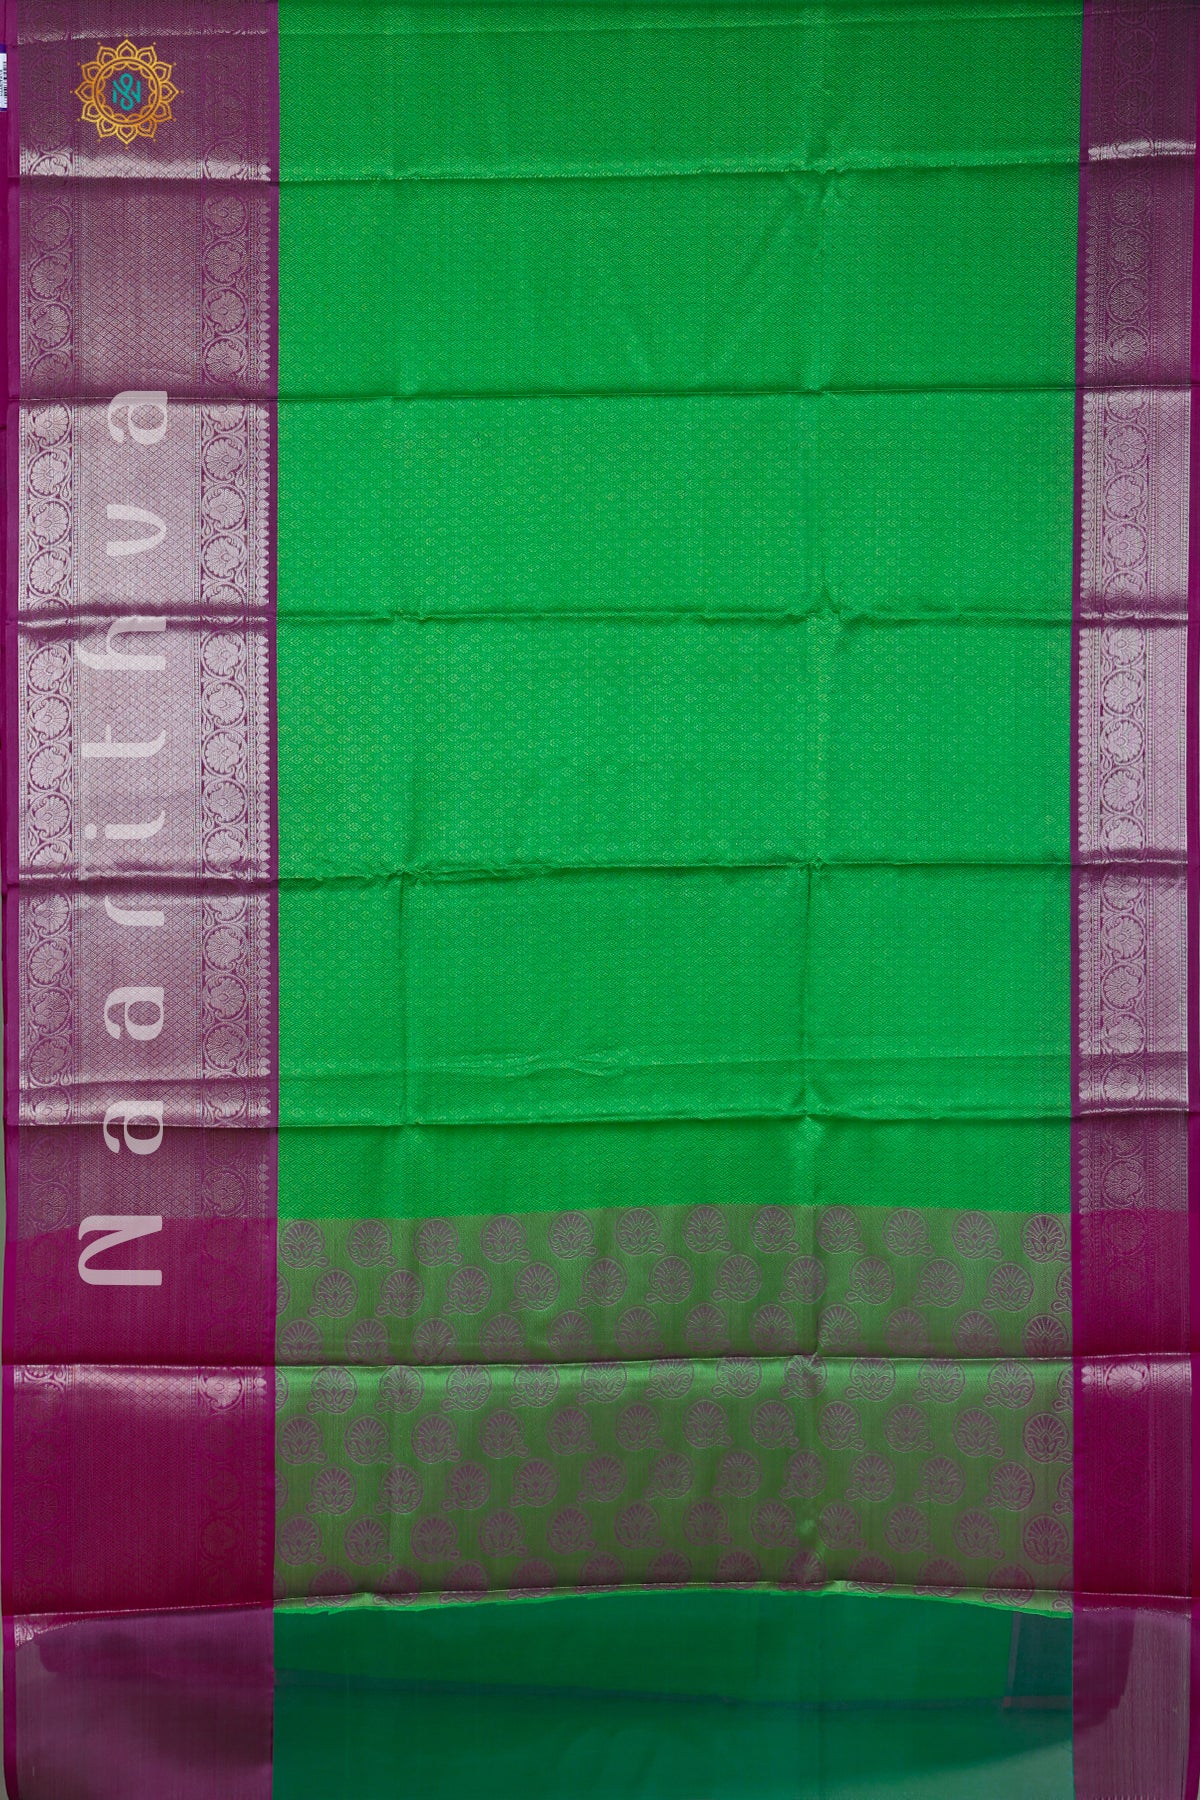 GREEN WITH PINK - KORA TANCHOI SILK WITH CONTRAST BORDER